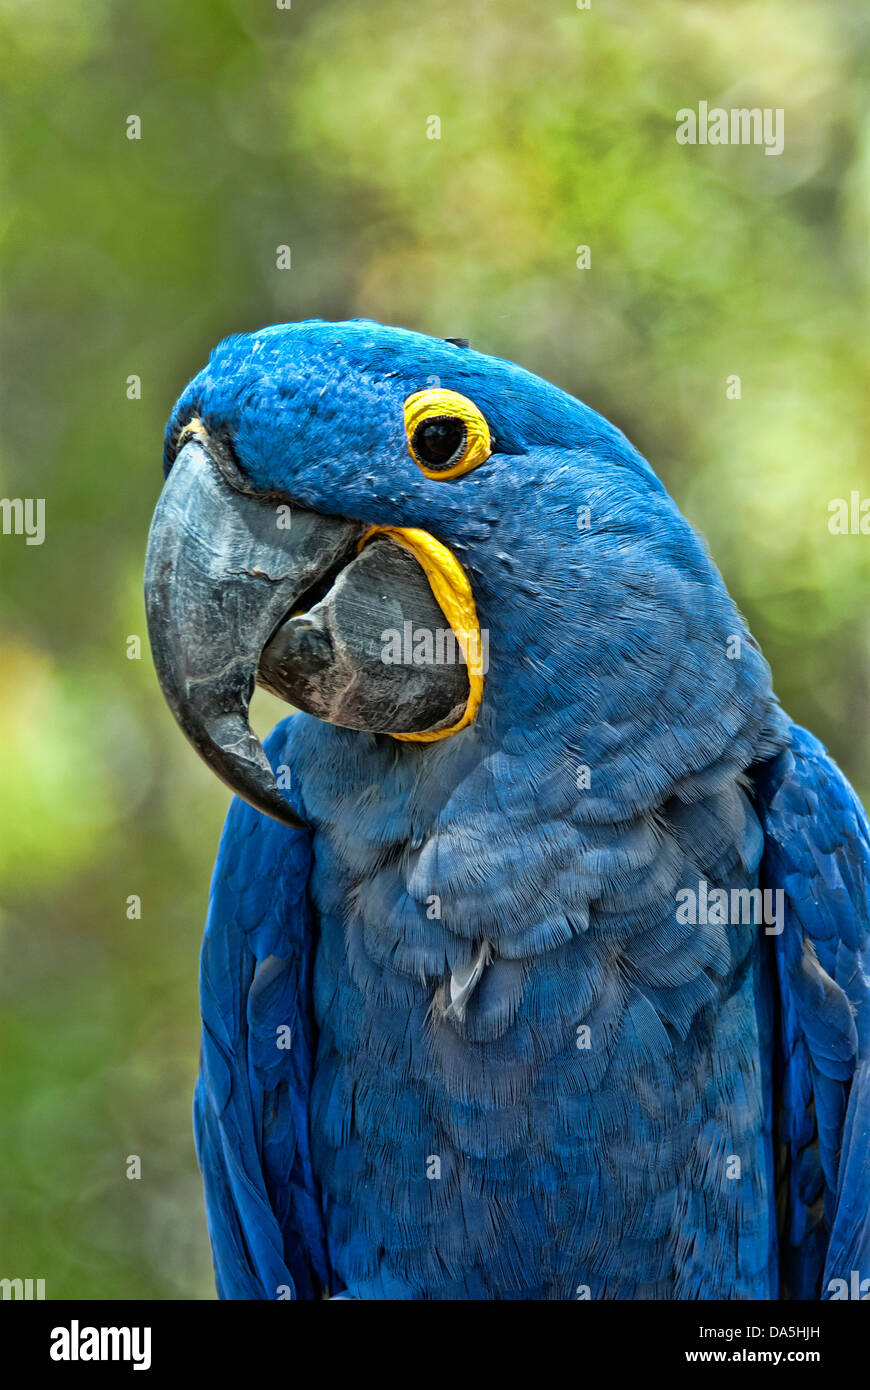 Hyacinth macaw, anodorhynchus nyacinthinus, USA, United States, Amérique, macaw, Parrot, bleu Banque D'Images